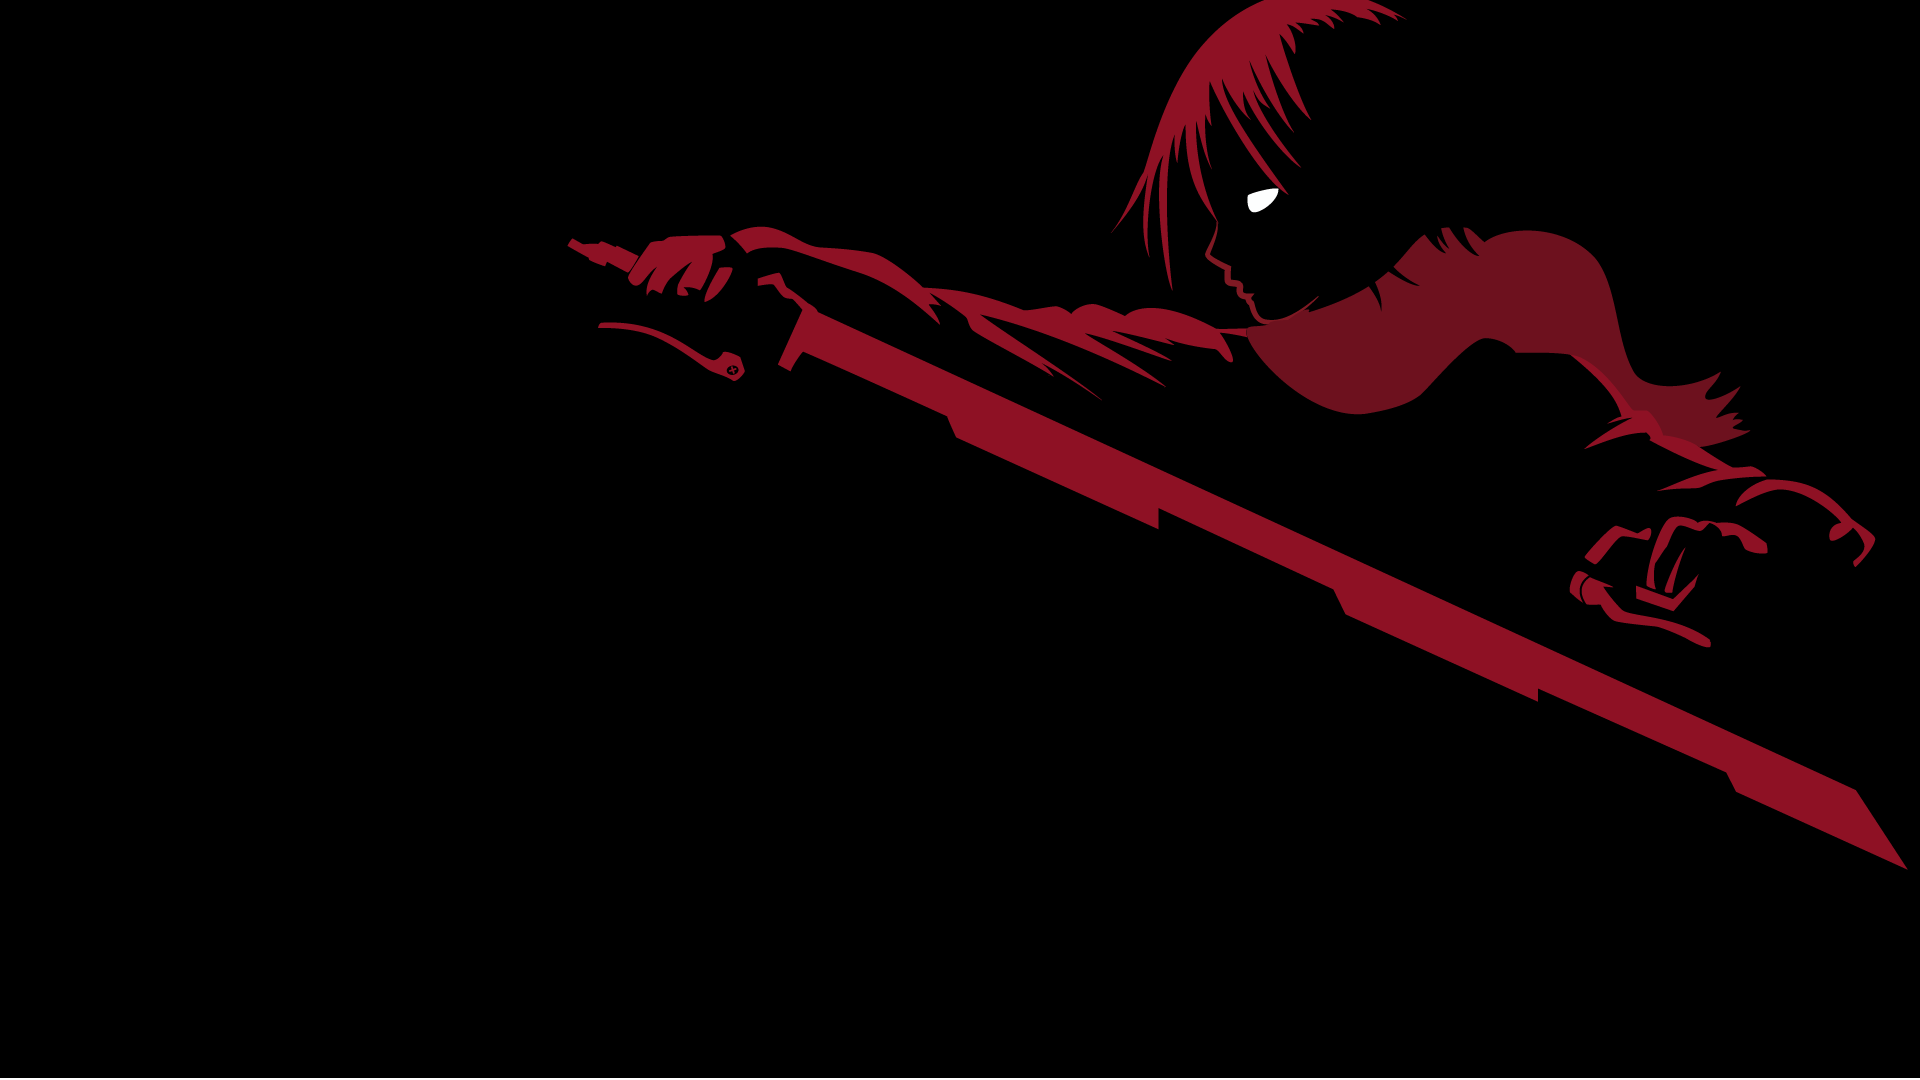 Make minimalist anime character by Zunnno | Fiverr